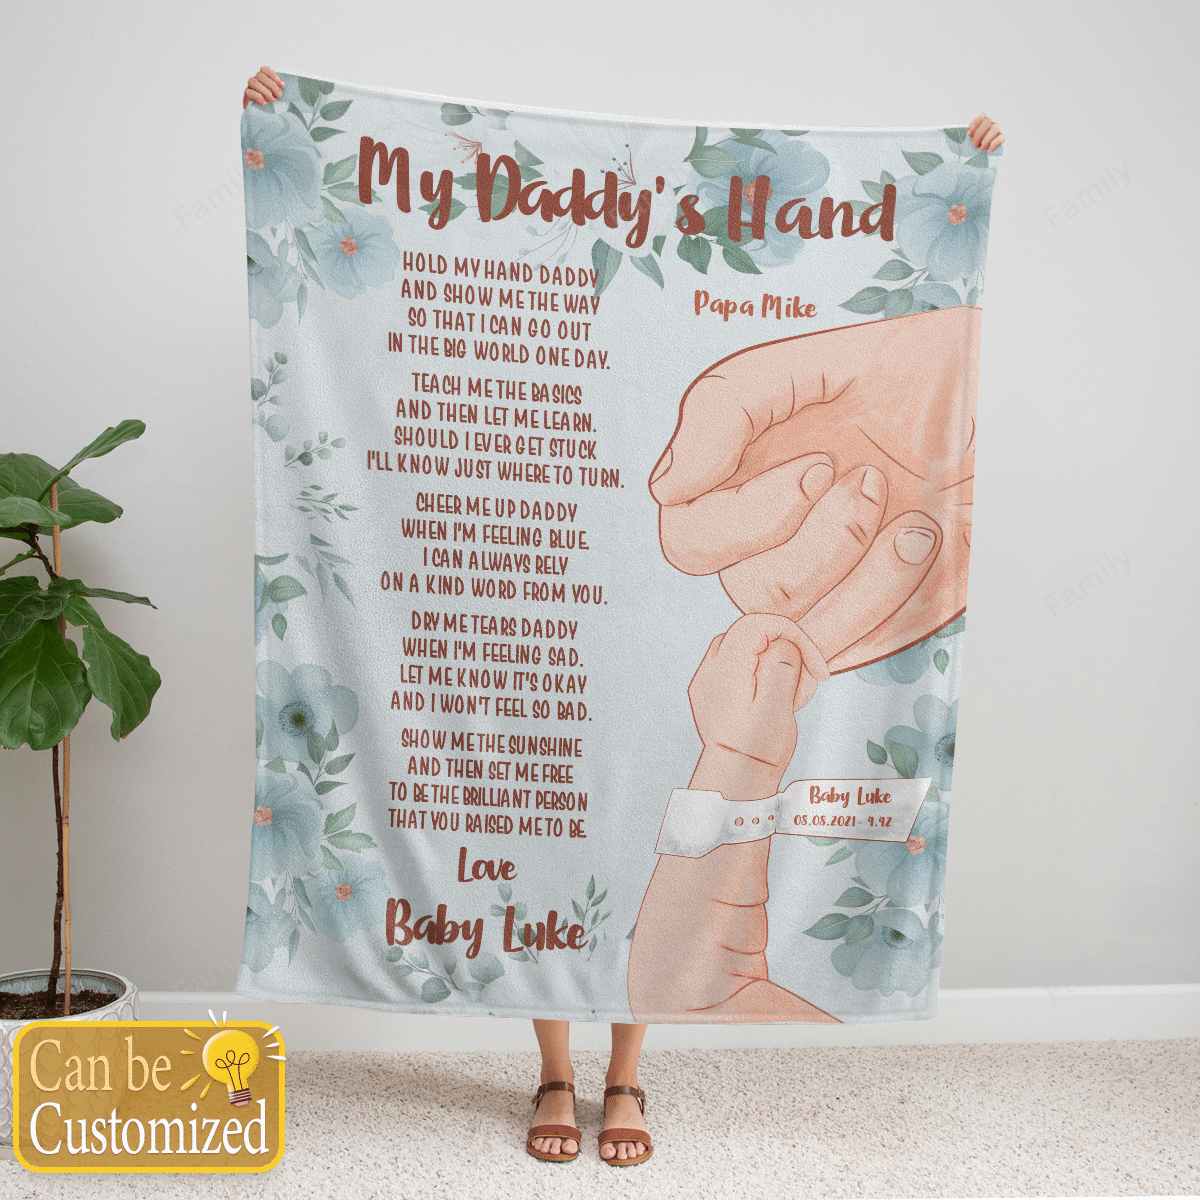 My Daddy's Hand- Customized Blanket